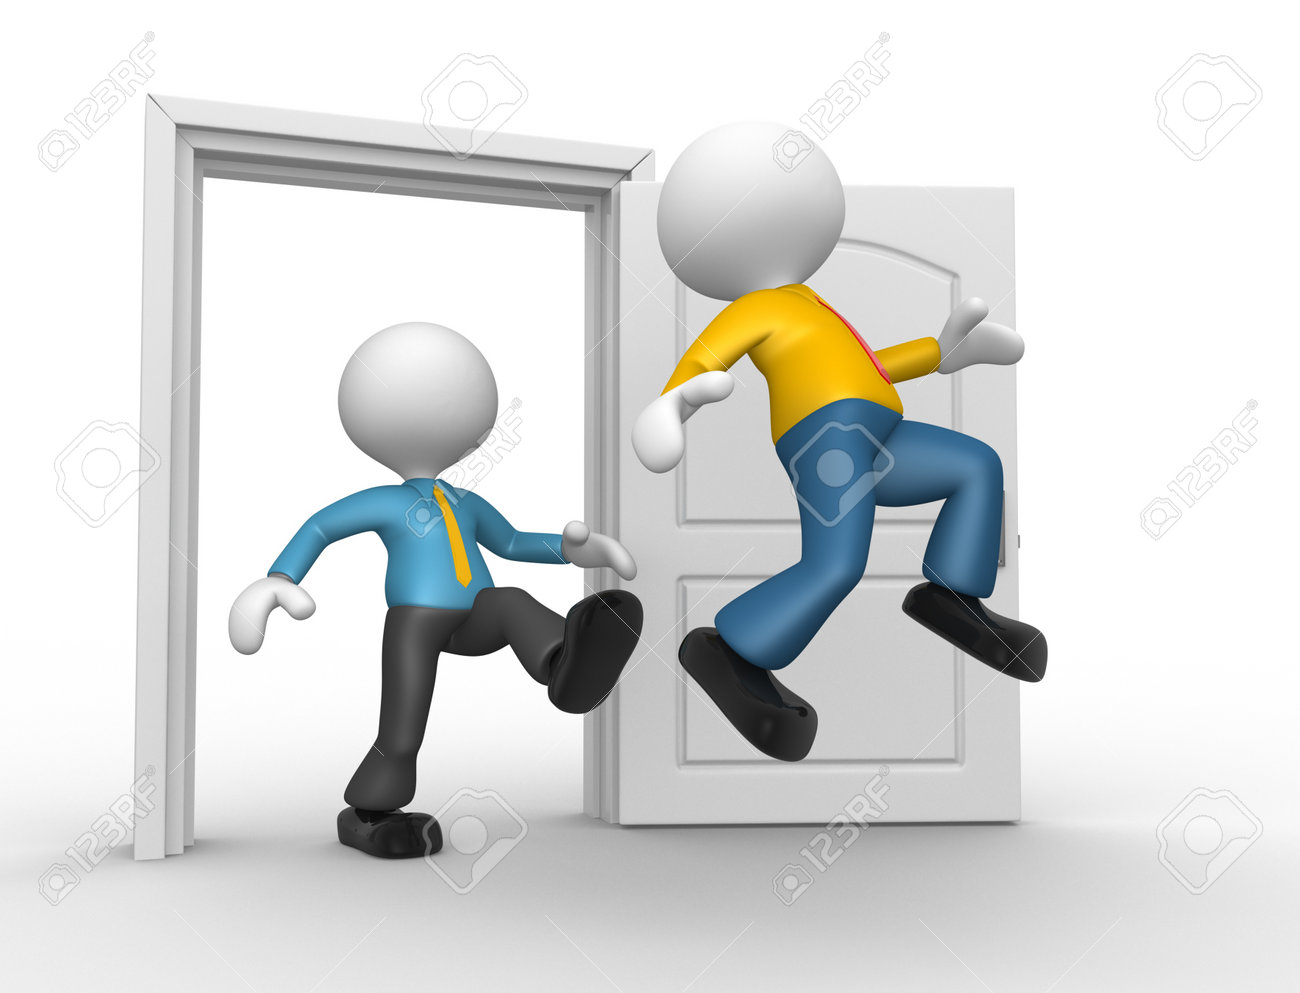 18494704-3d-people-man-person-kicked-out-the-door.jpg